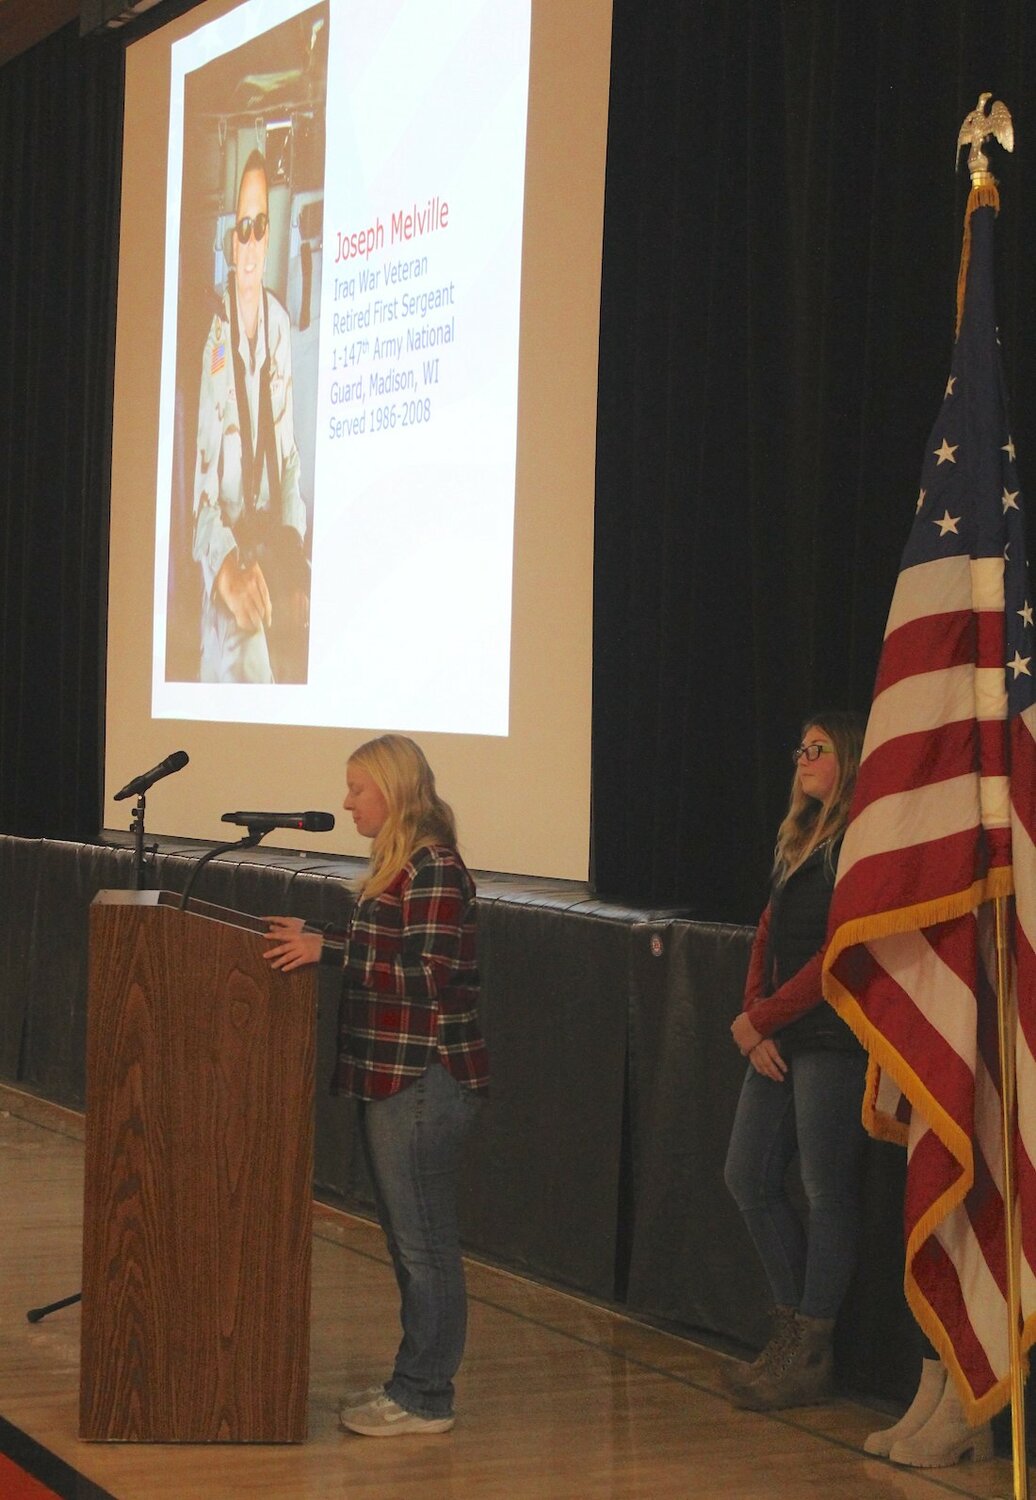 Taniele Ducommun speaks about her time at Badger Boys State, a Legion sponsored event.